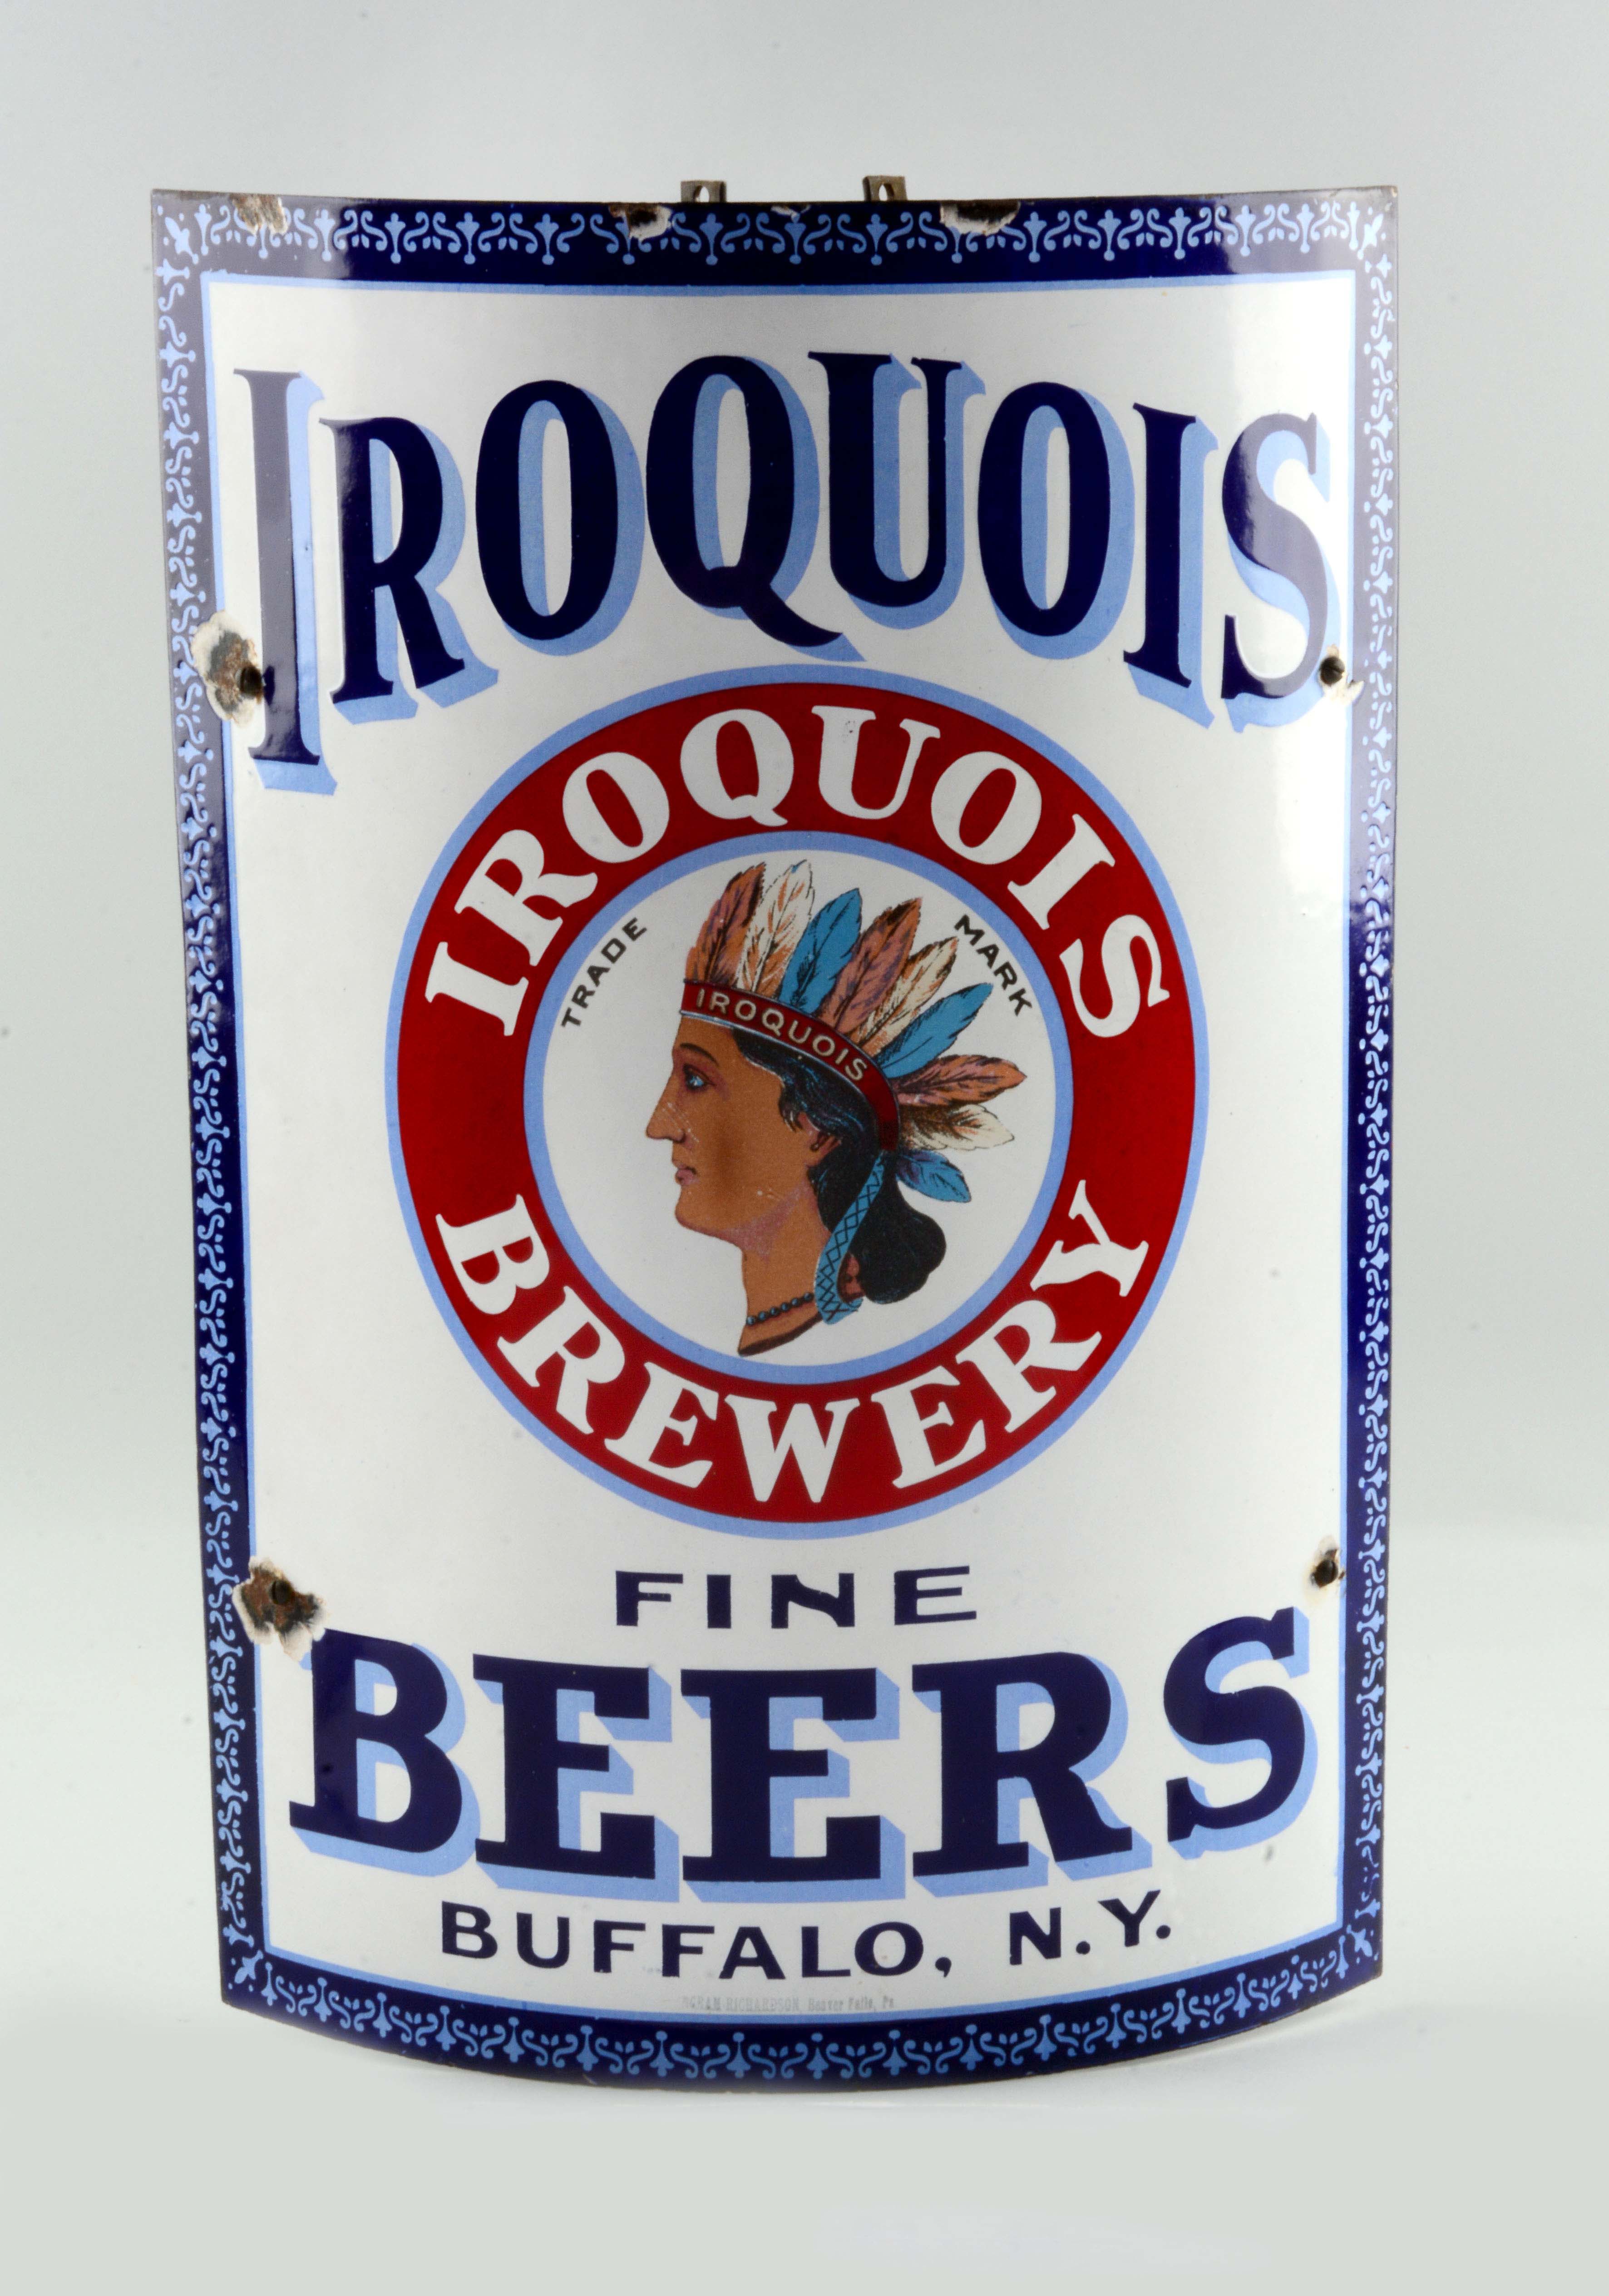 Iroquois Brewery Beer Porcelain Corner Sign, estimated at $10,000-20,000.